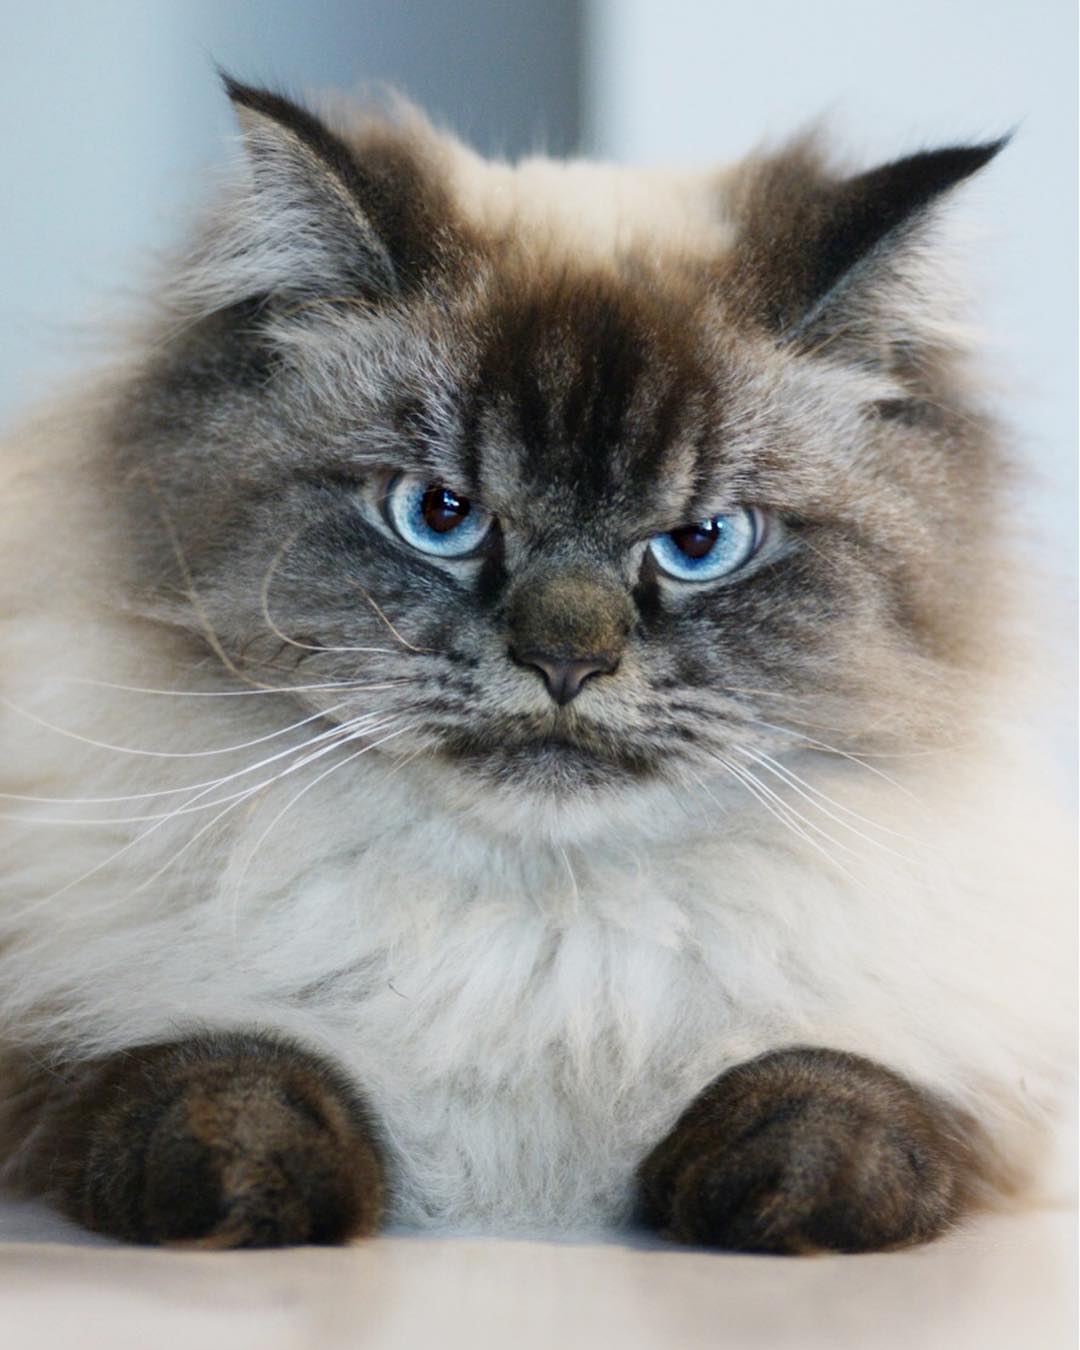 Meet Merlin, The Ragdoll Cat Who Looks Always Pissed Off - Page 3 of 4